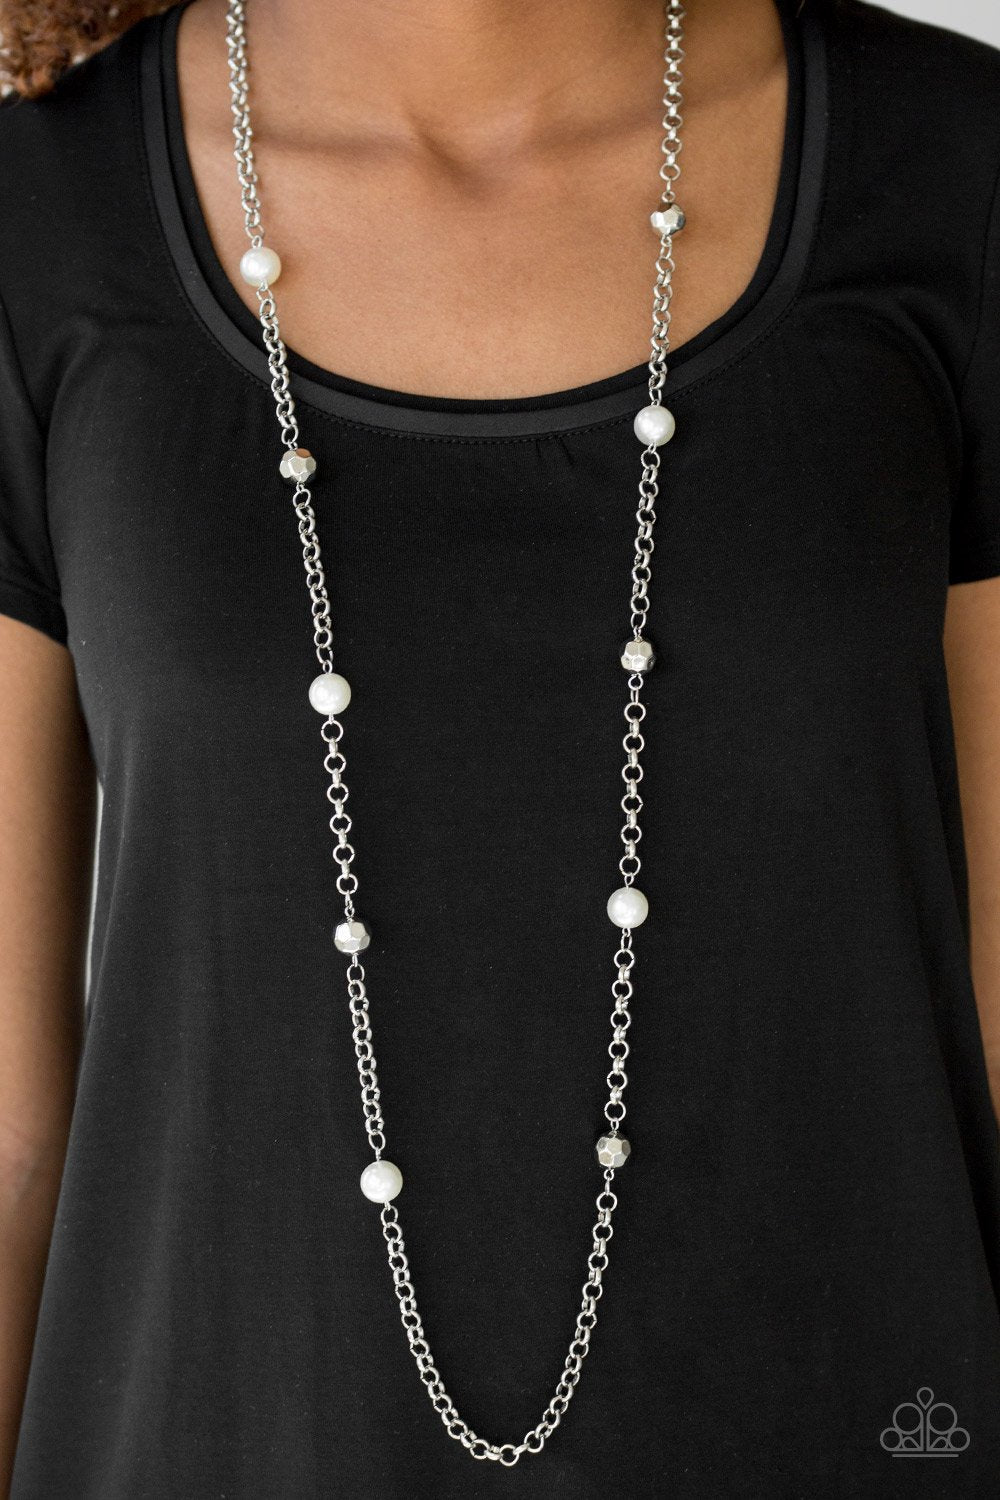 Showroom Shimmer - White pearl necklace